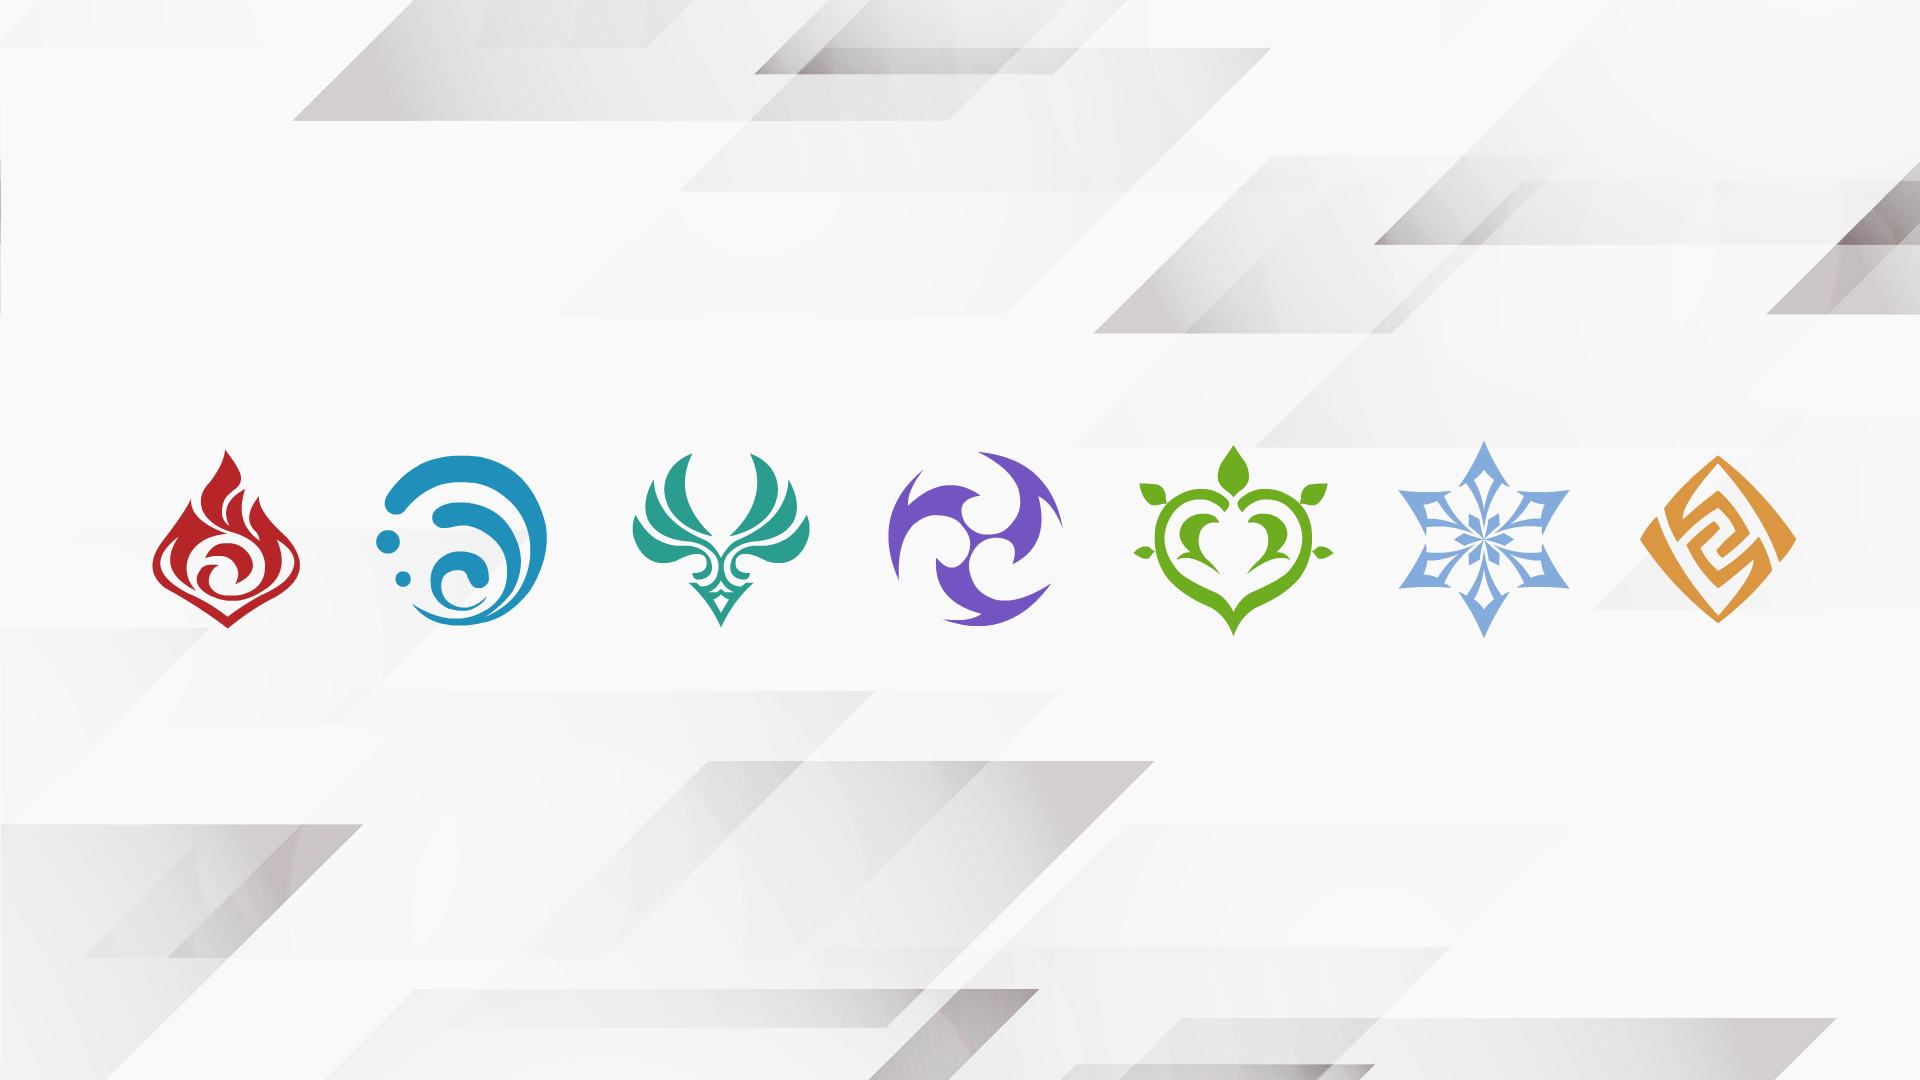 I made a wallpaper of the 7 elements in Genshin Impact